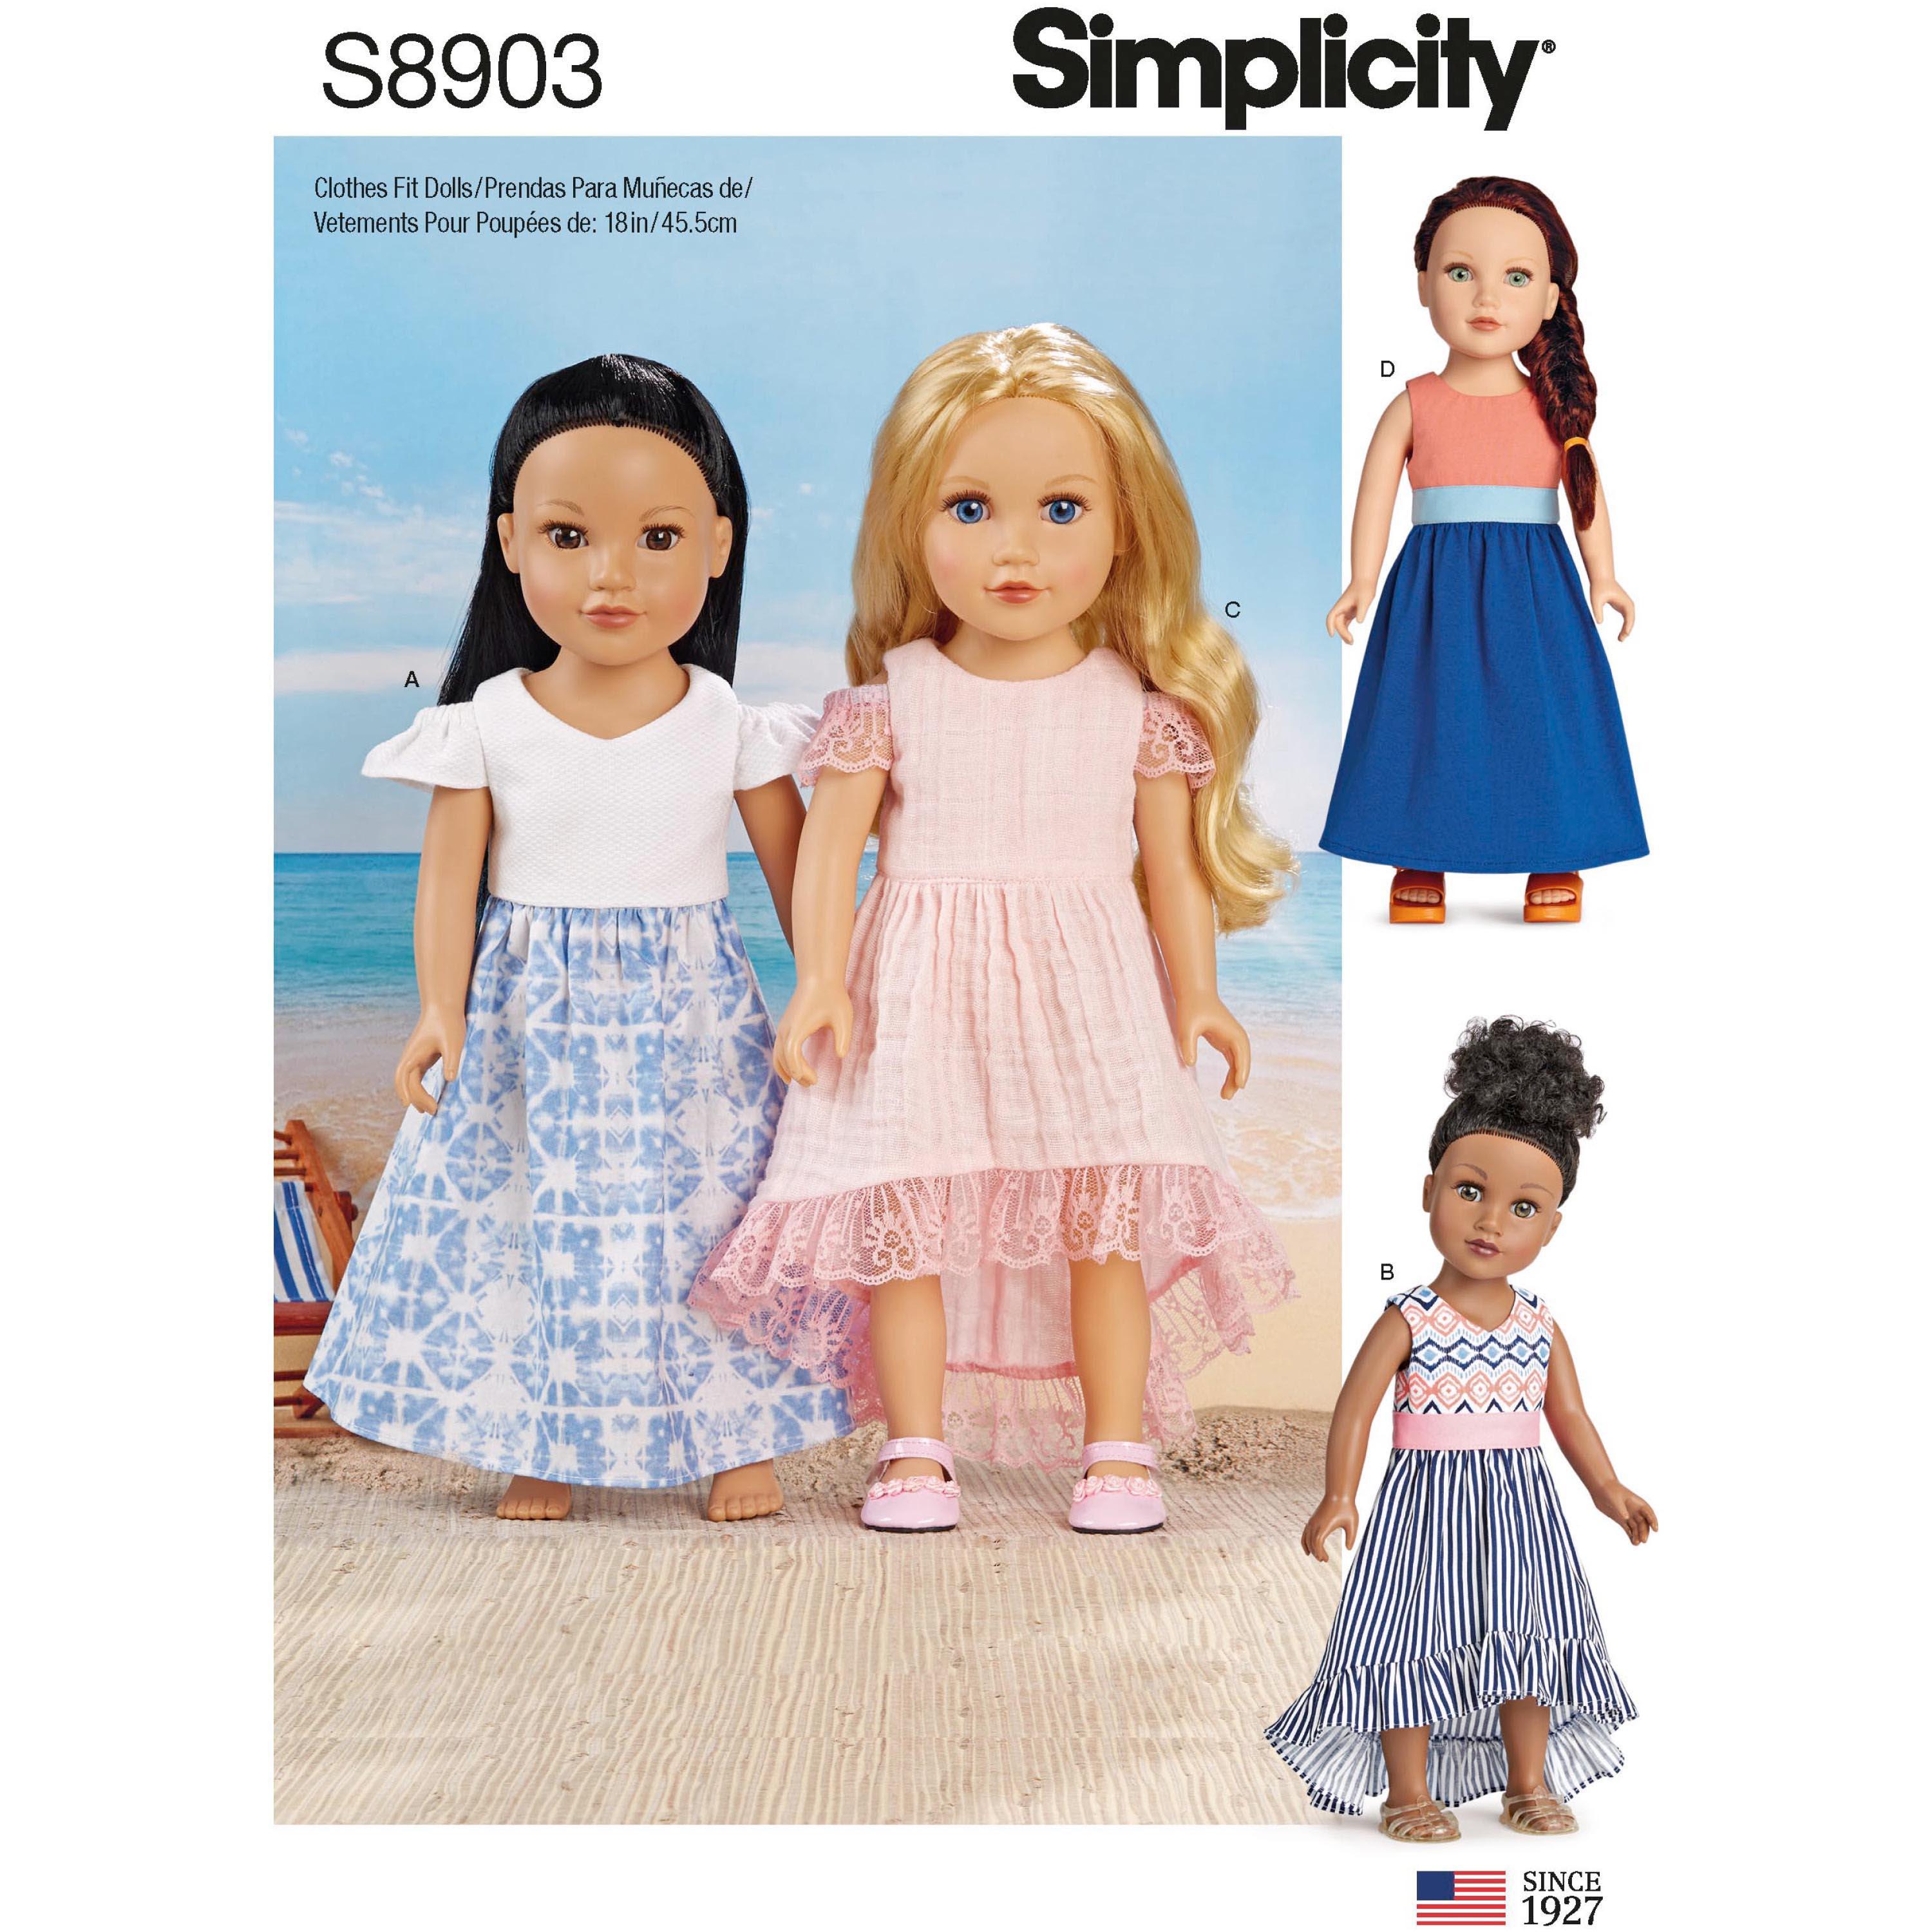 Simplicity S8903 18" Doll Clothes